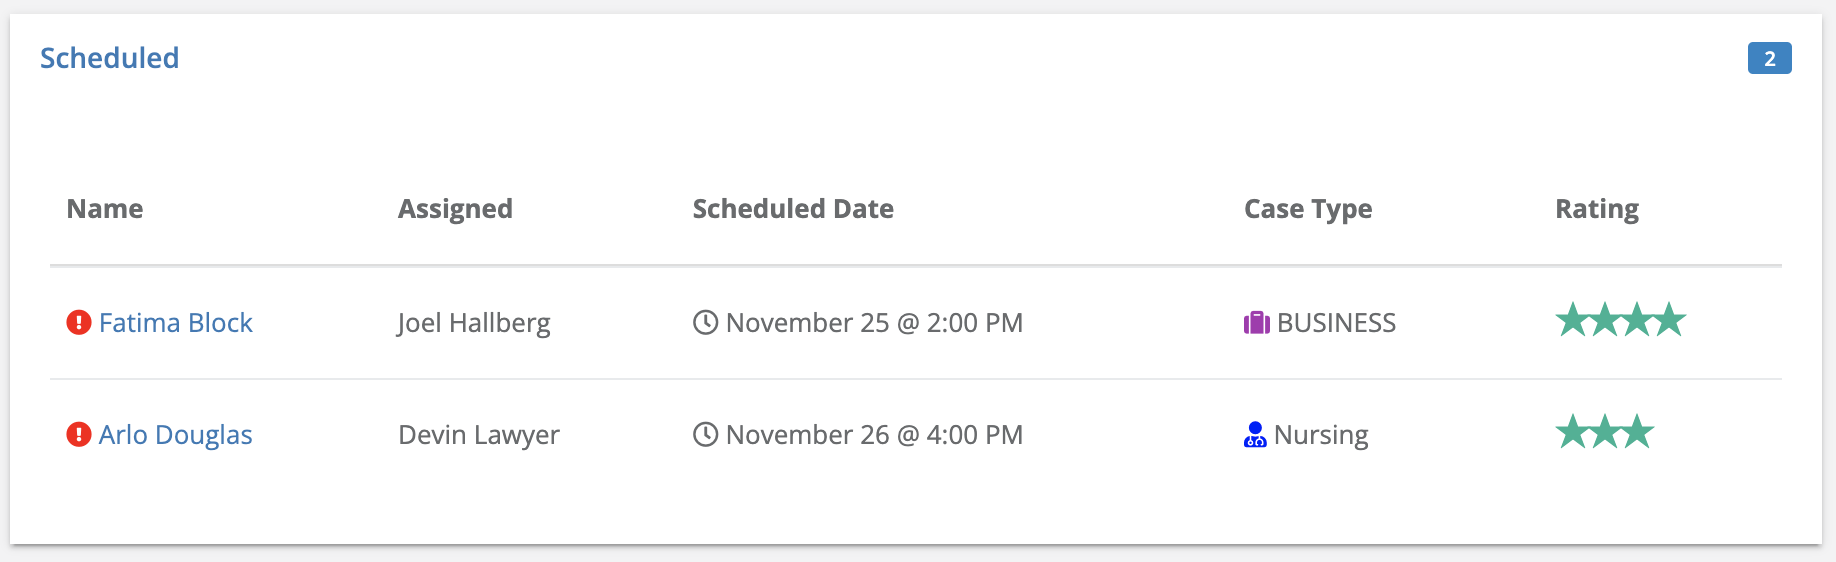 Scheduled.png